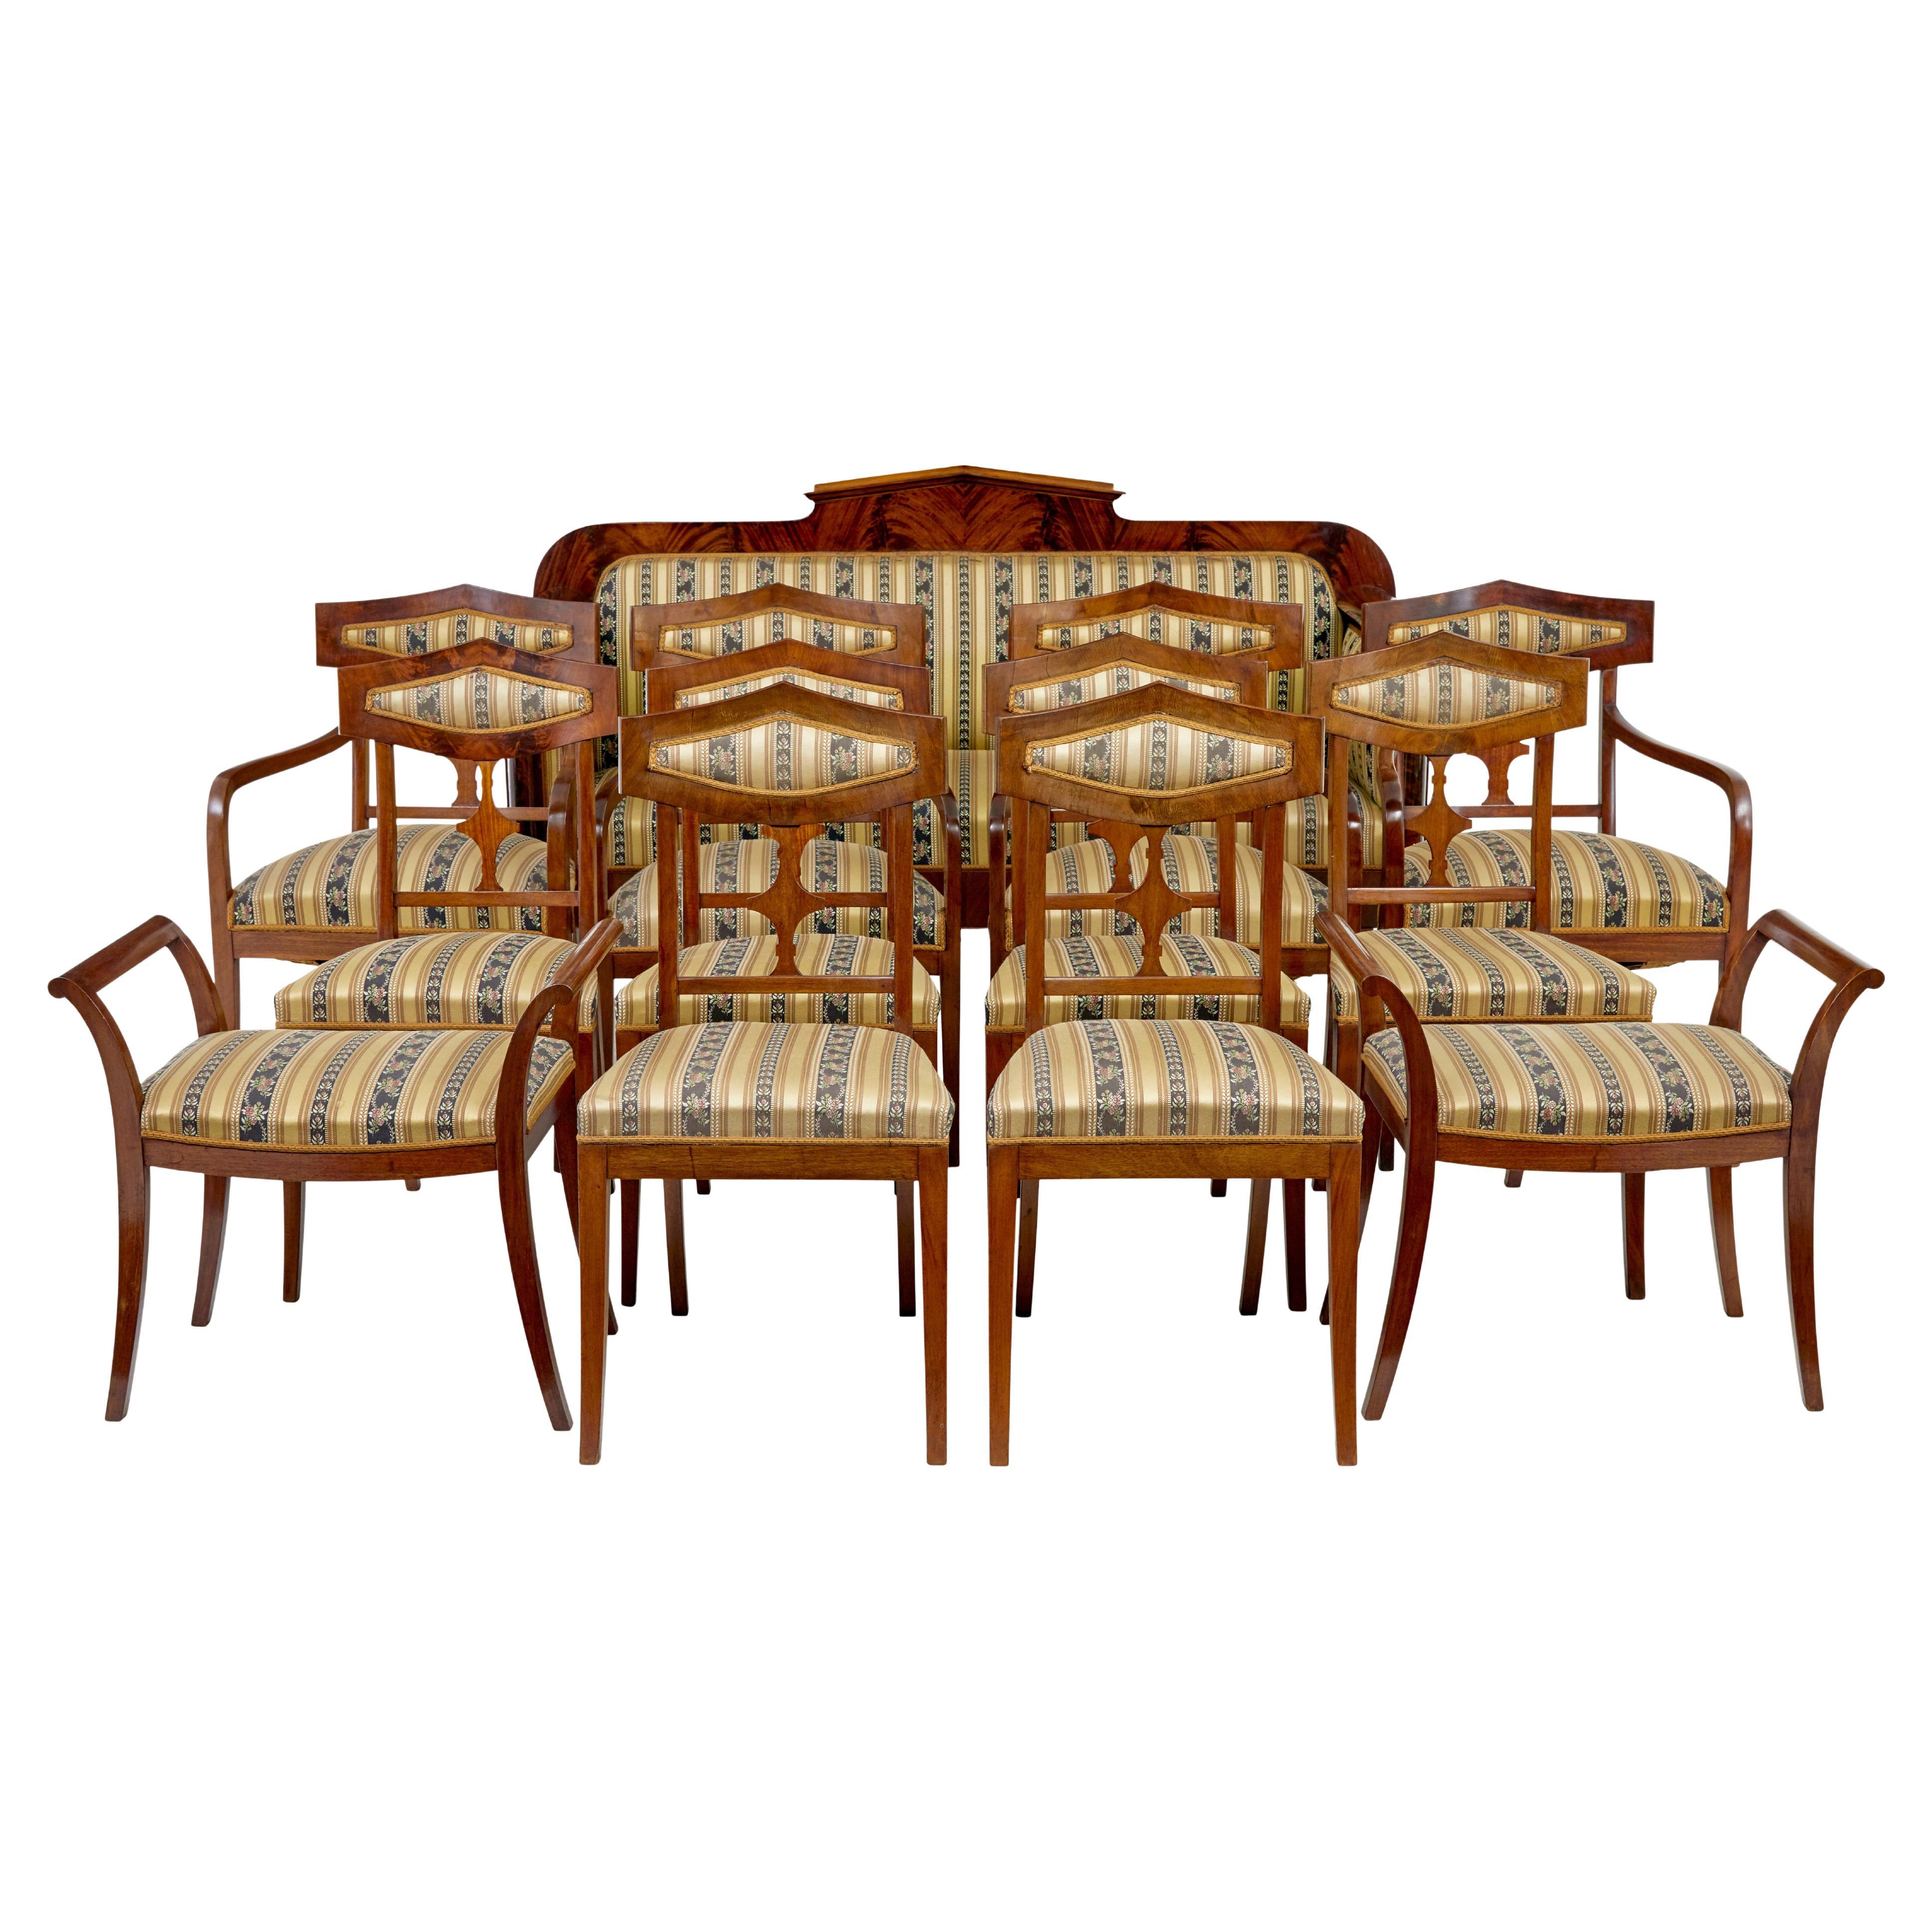 Early 20th century 13 piece mahogany salon suite For Sale